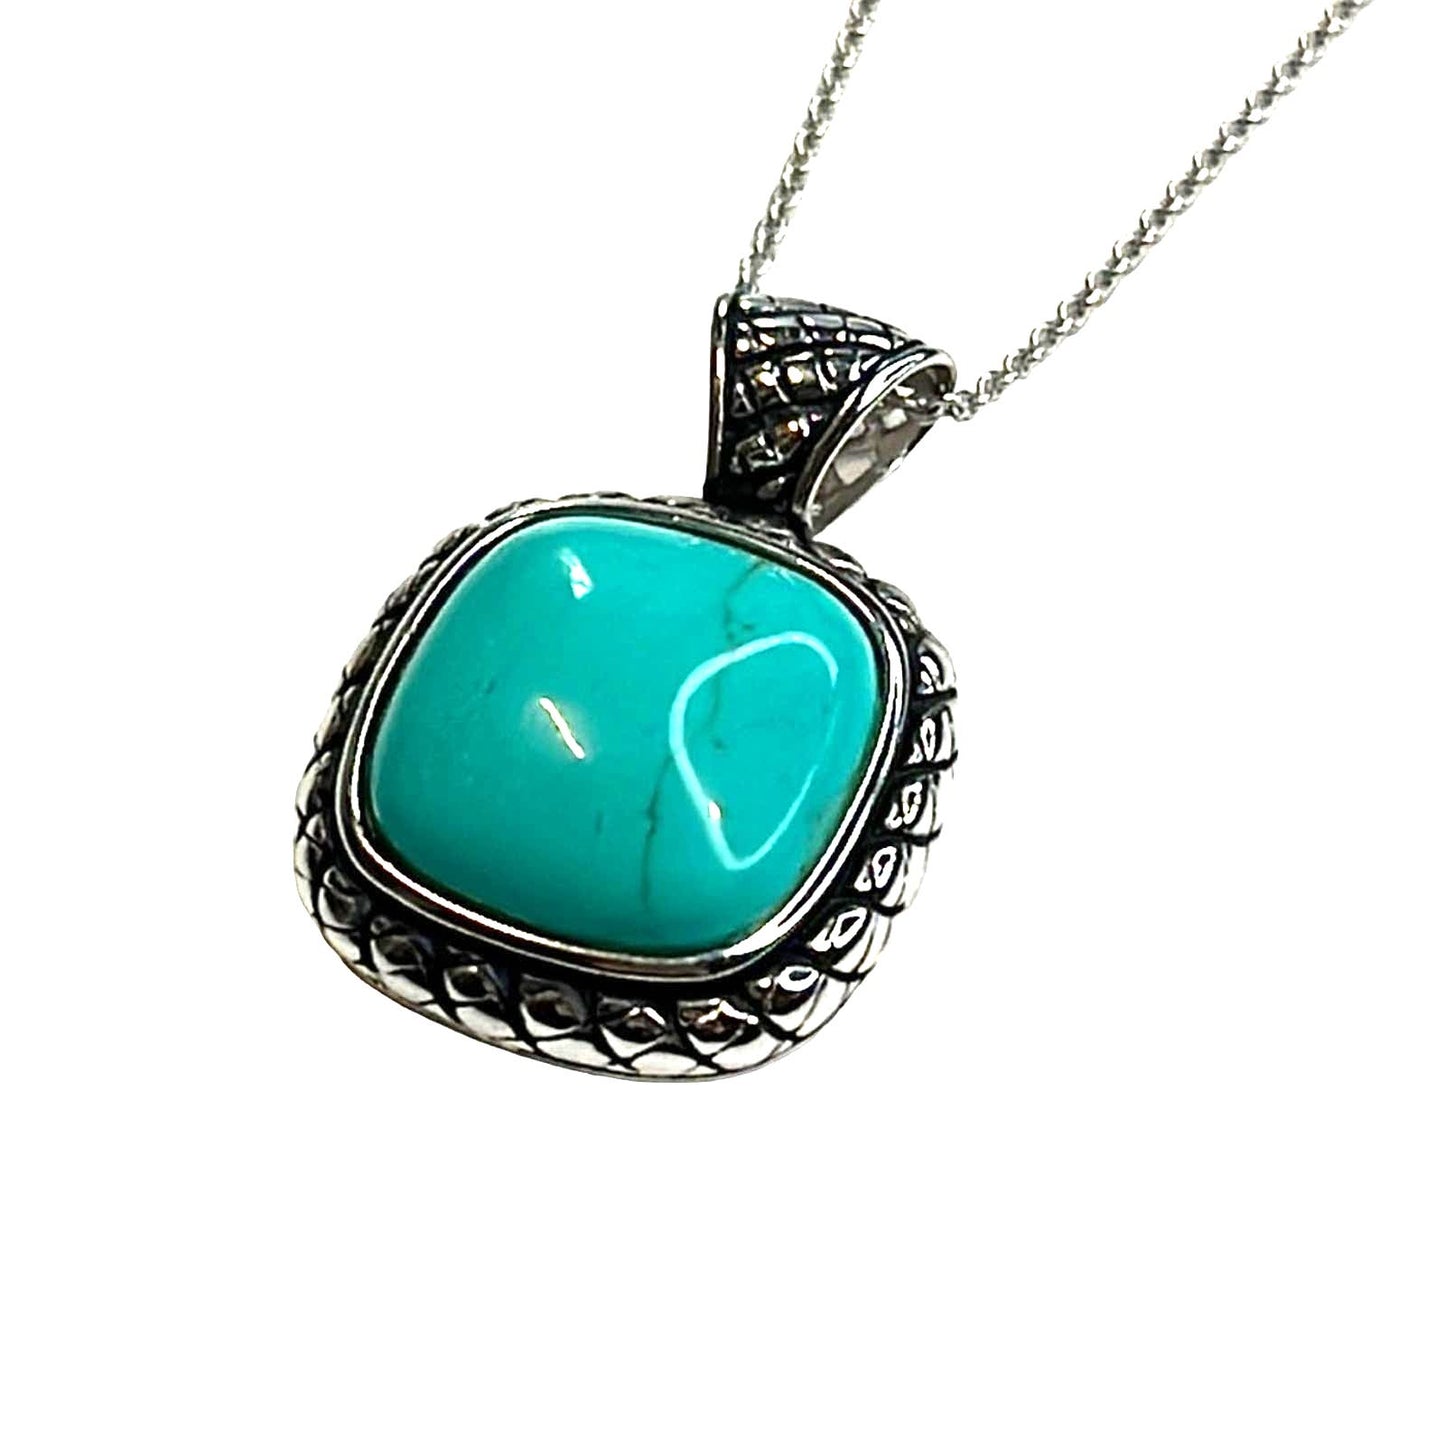 R. H. Macy Silver & Turquoise Square Necklace, NWT!